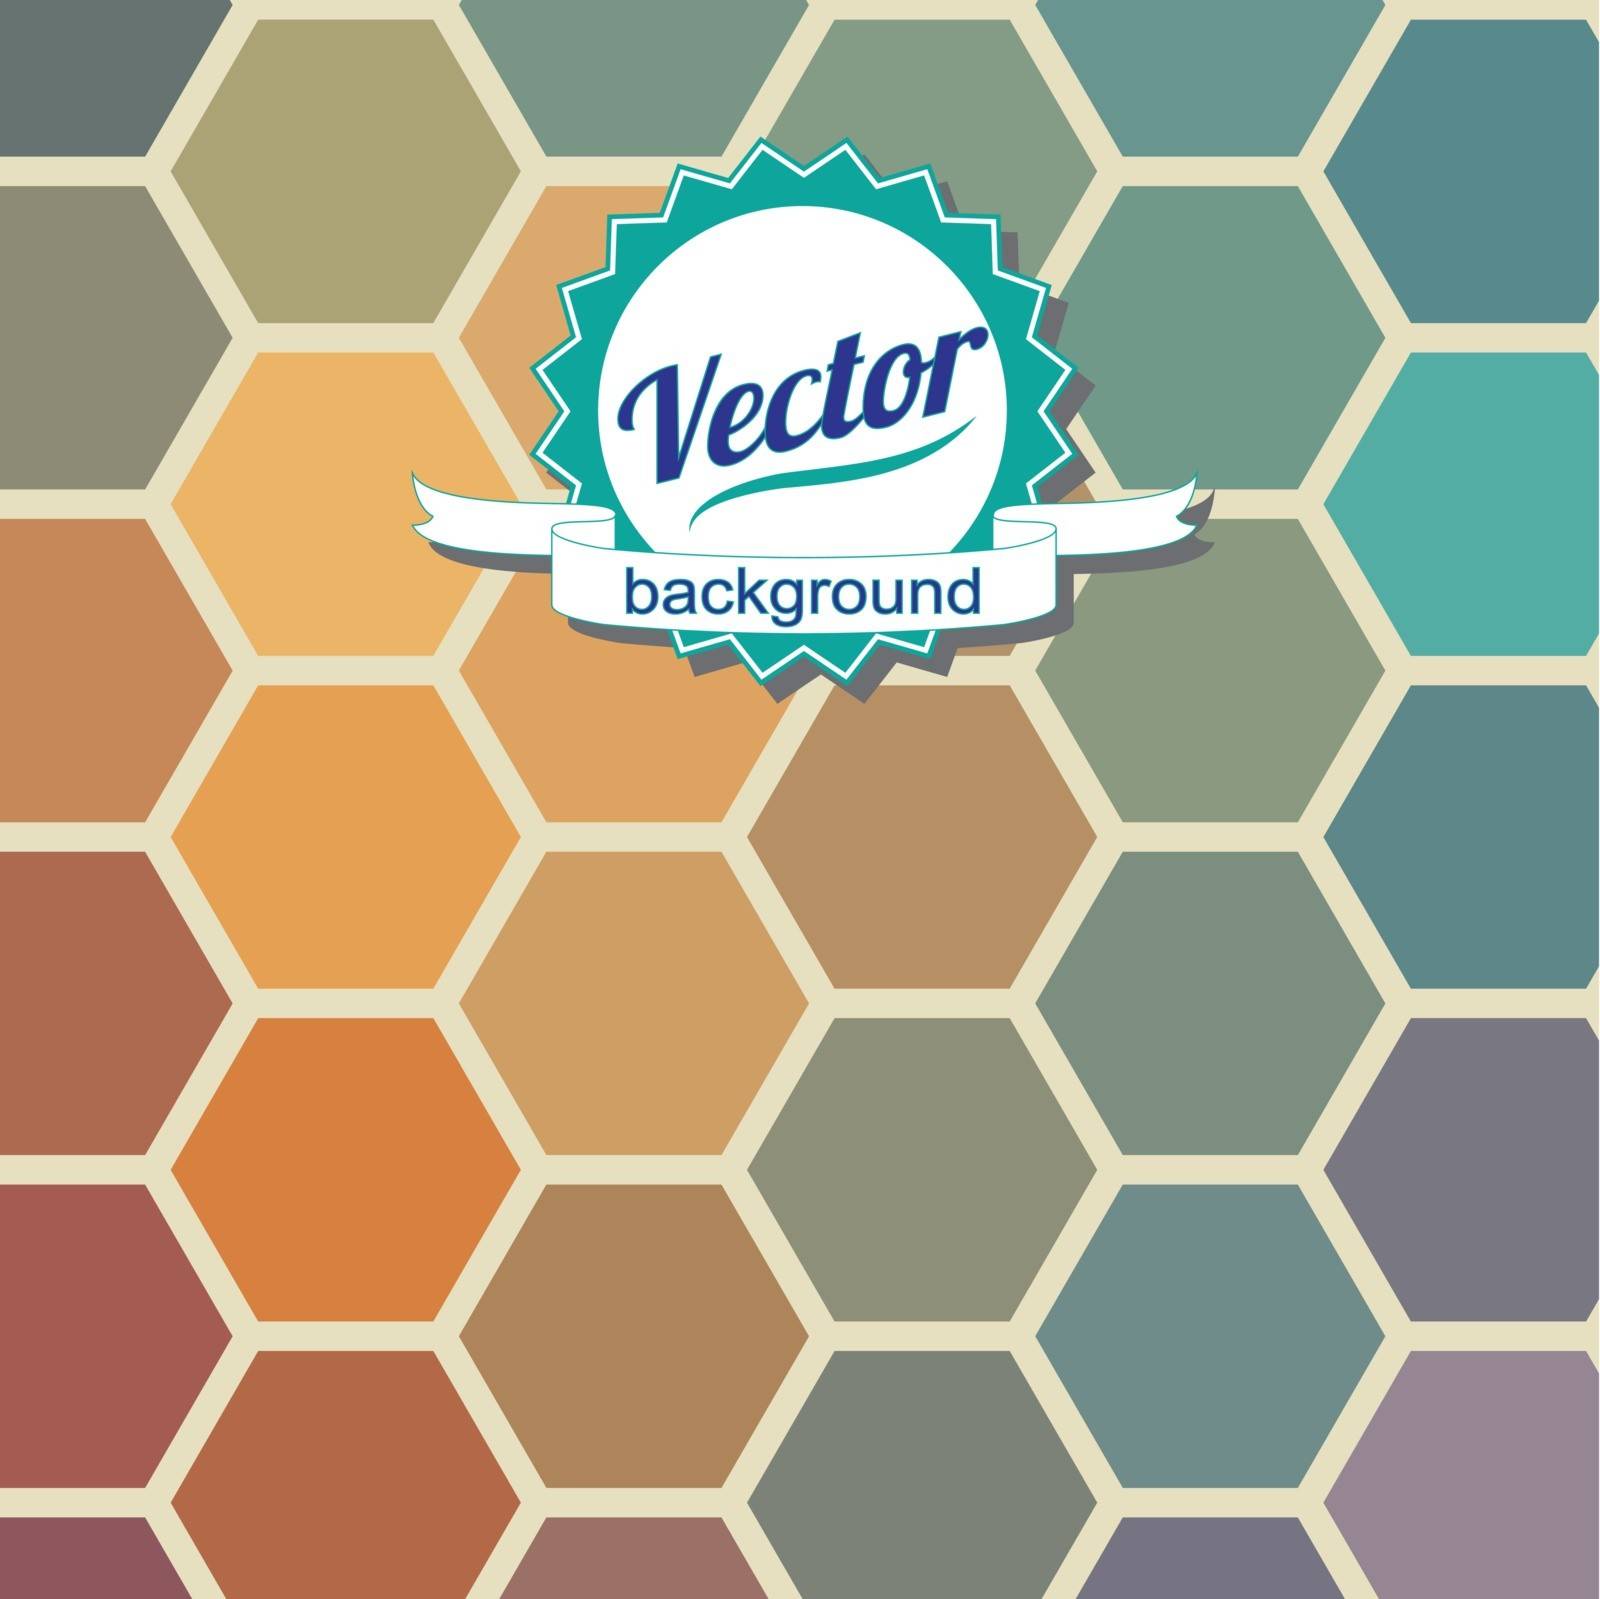 background of the hexagons by LittleCuckoo